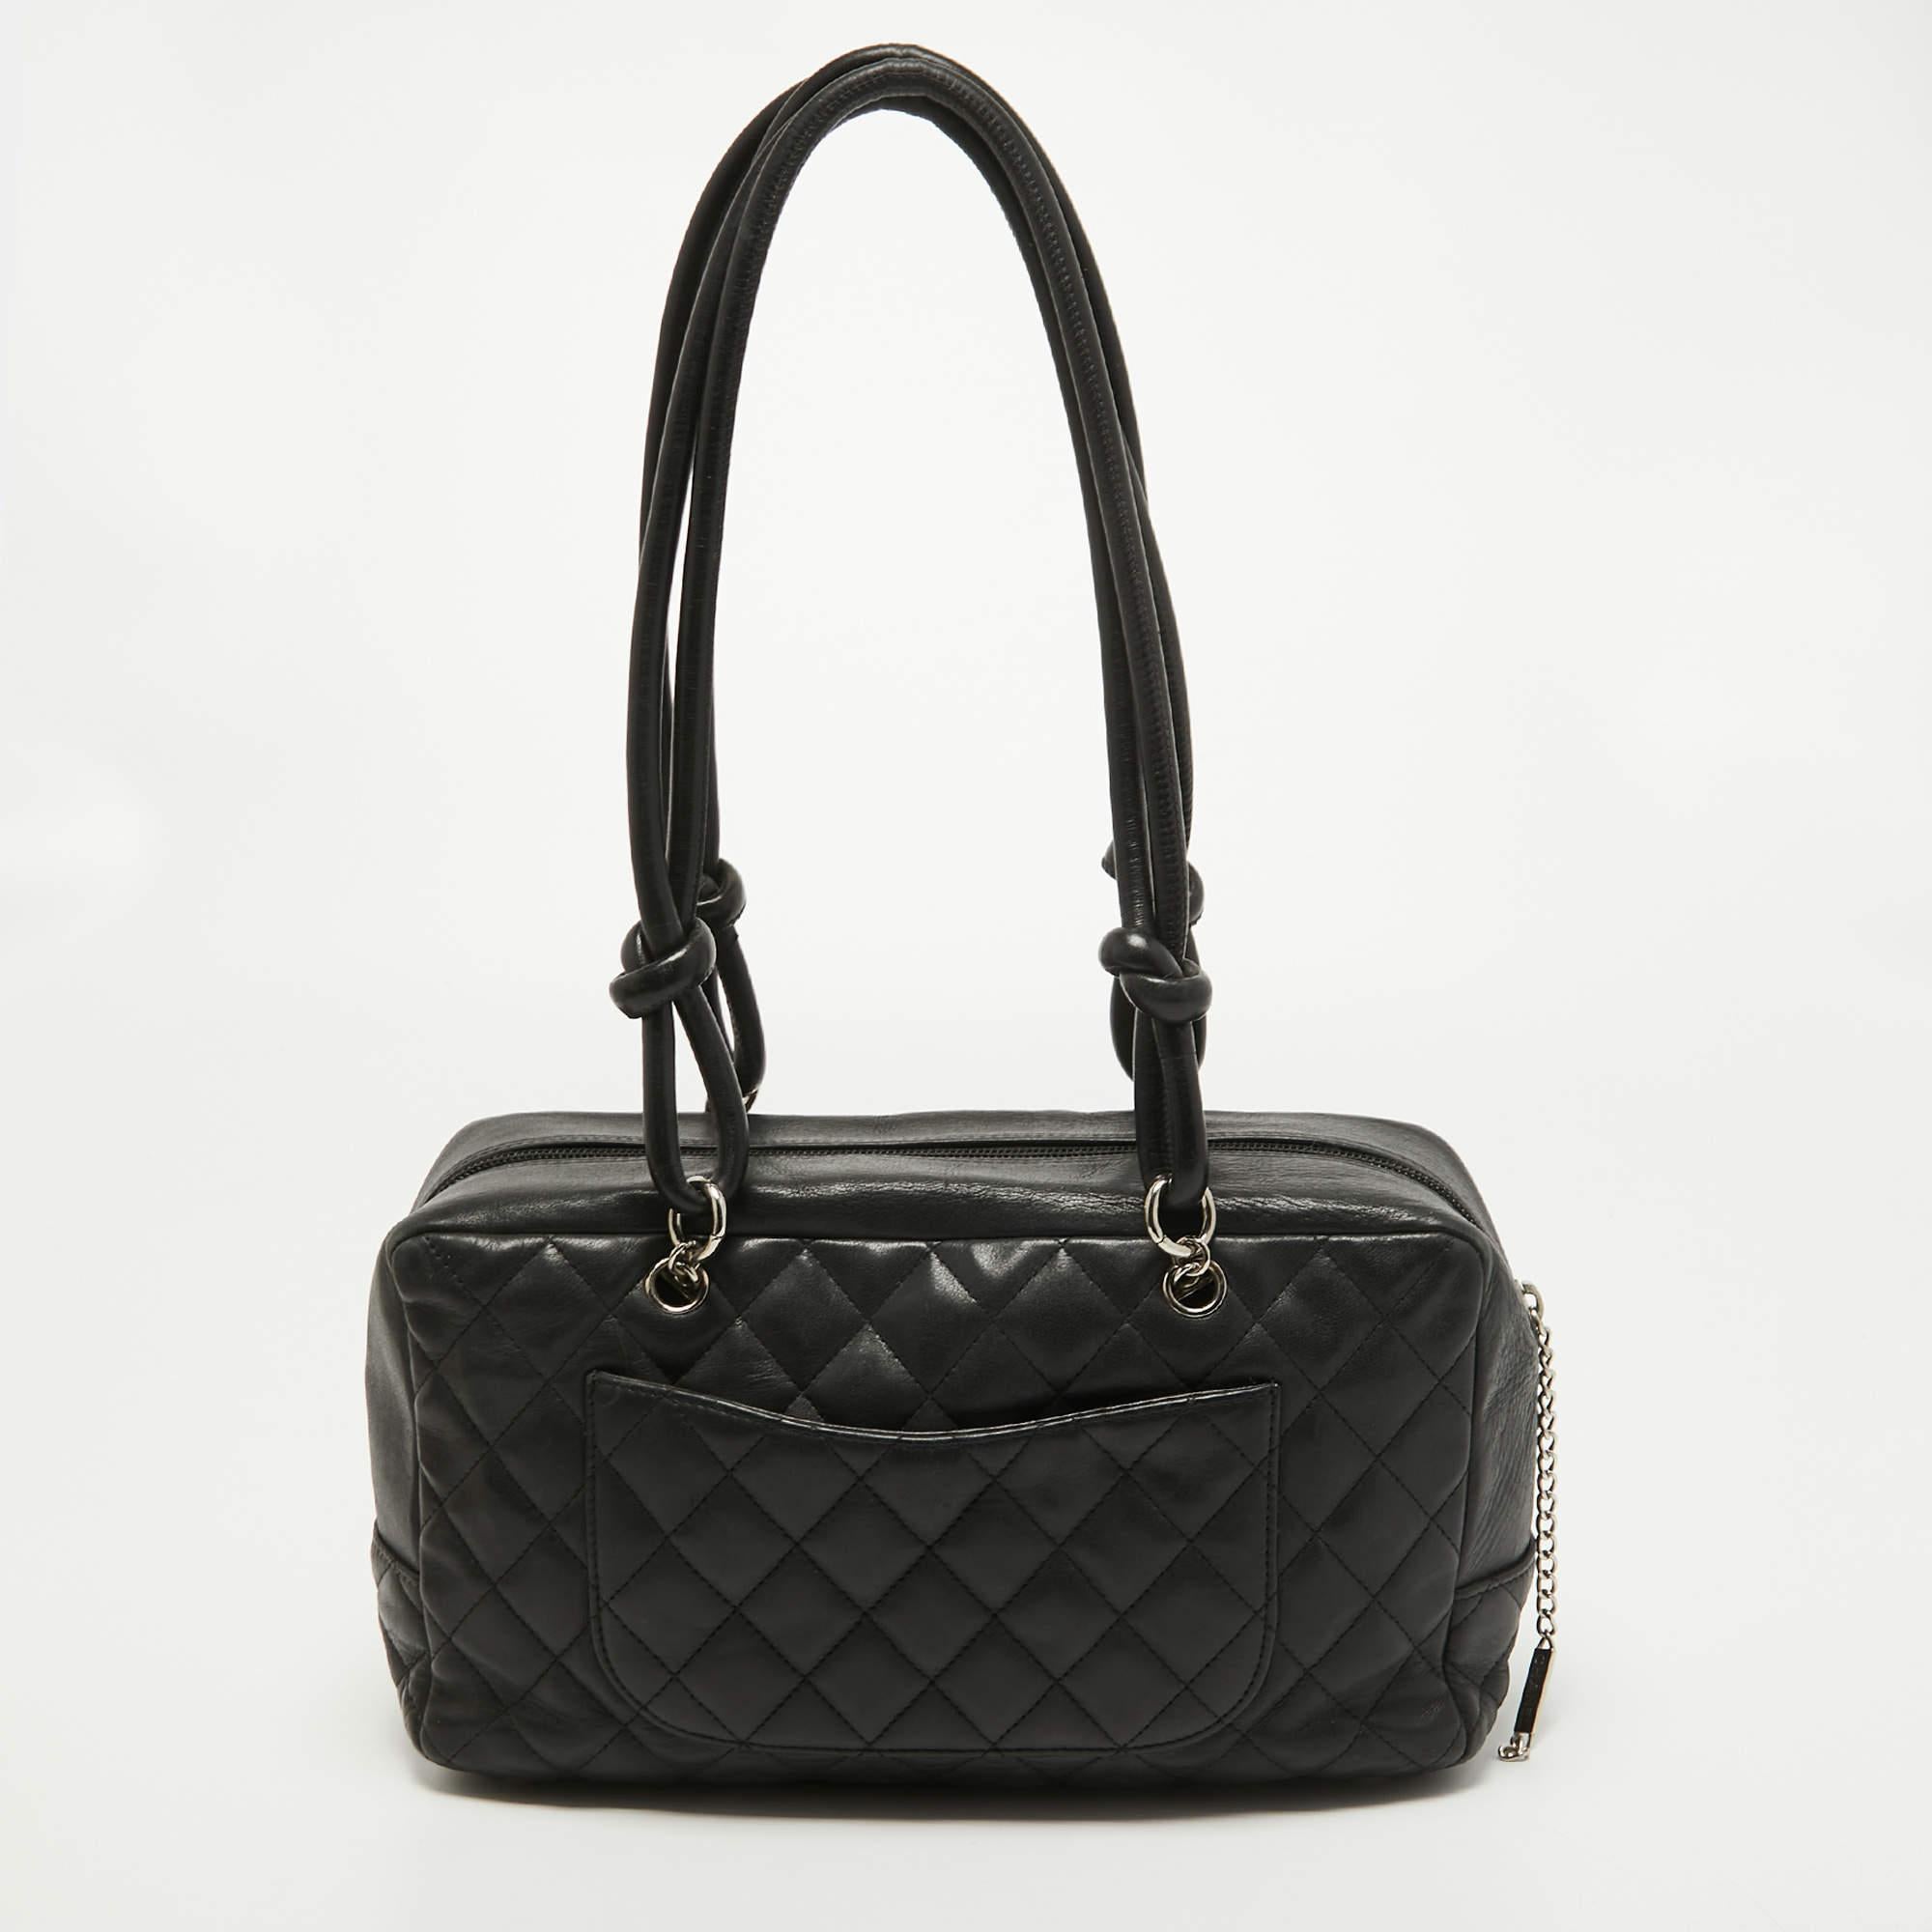 Radiate with elegance when you swing this Bowler bag from Chanel. Beautifully crafted from quilted leather in black and designed with the CC logo on the side, this bag is a beauty. A zip closure secures a spacious interior, and the bag is held by